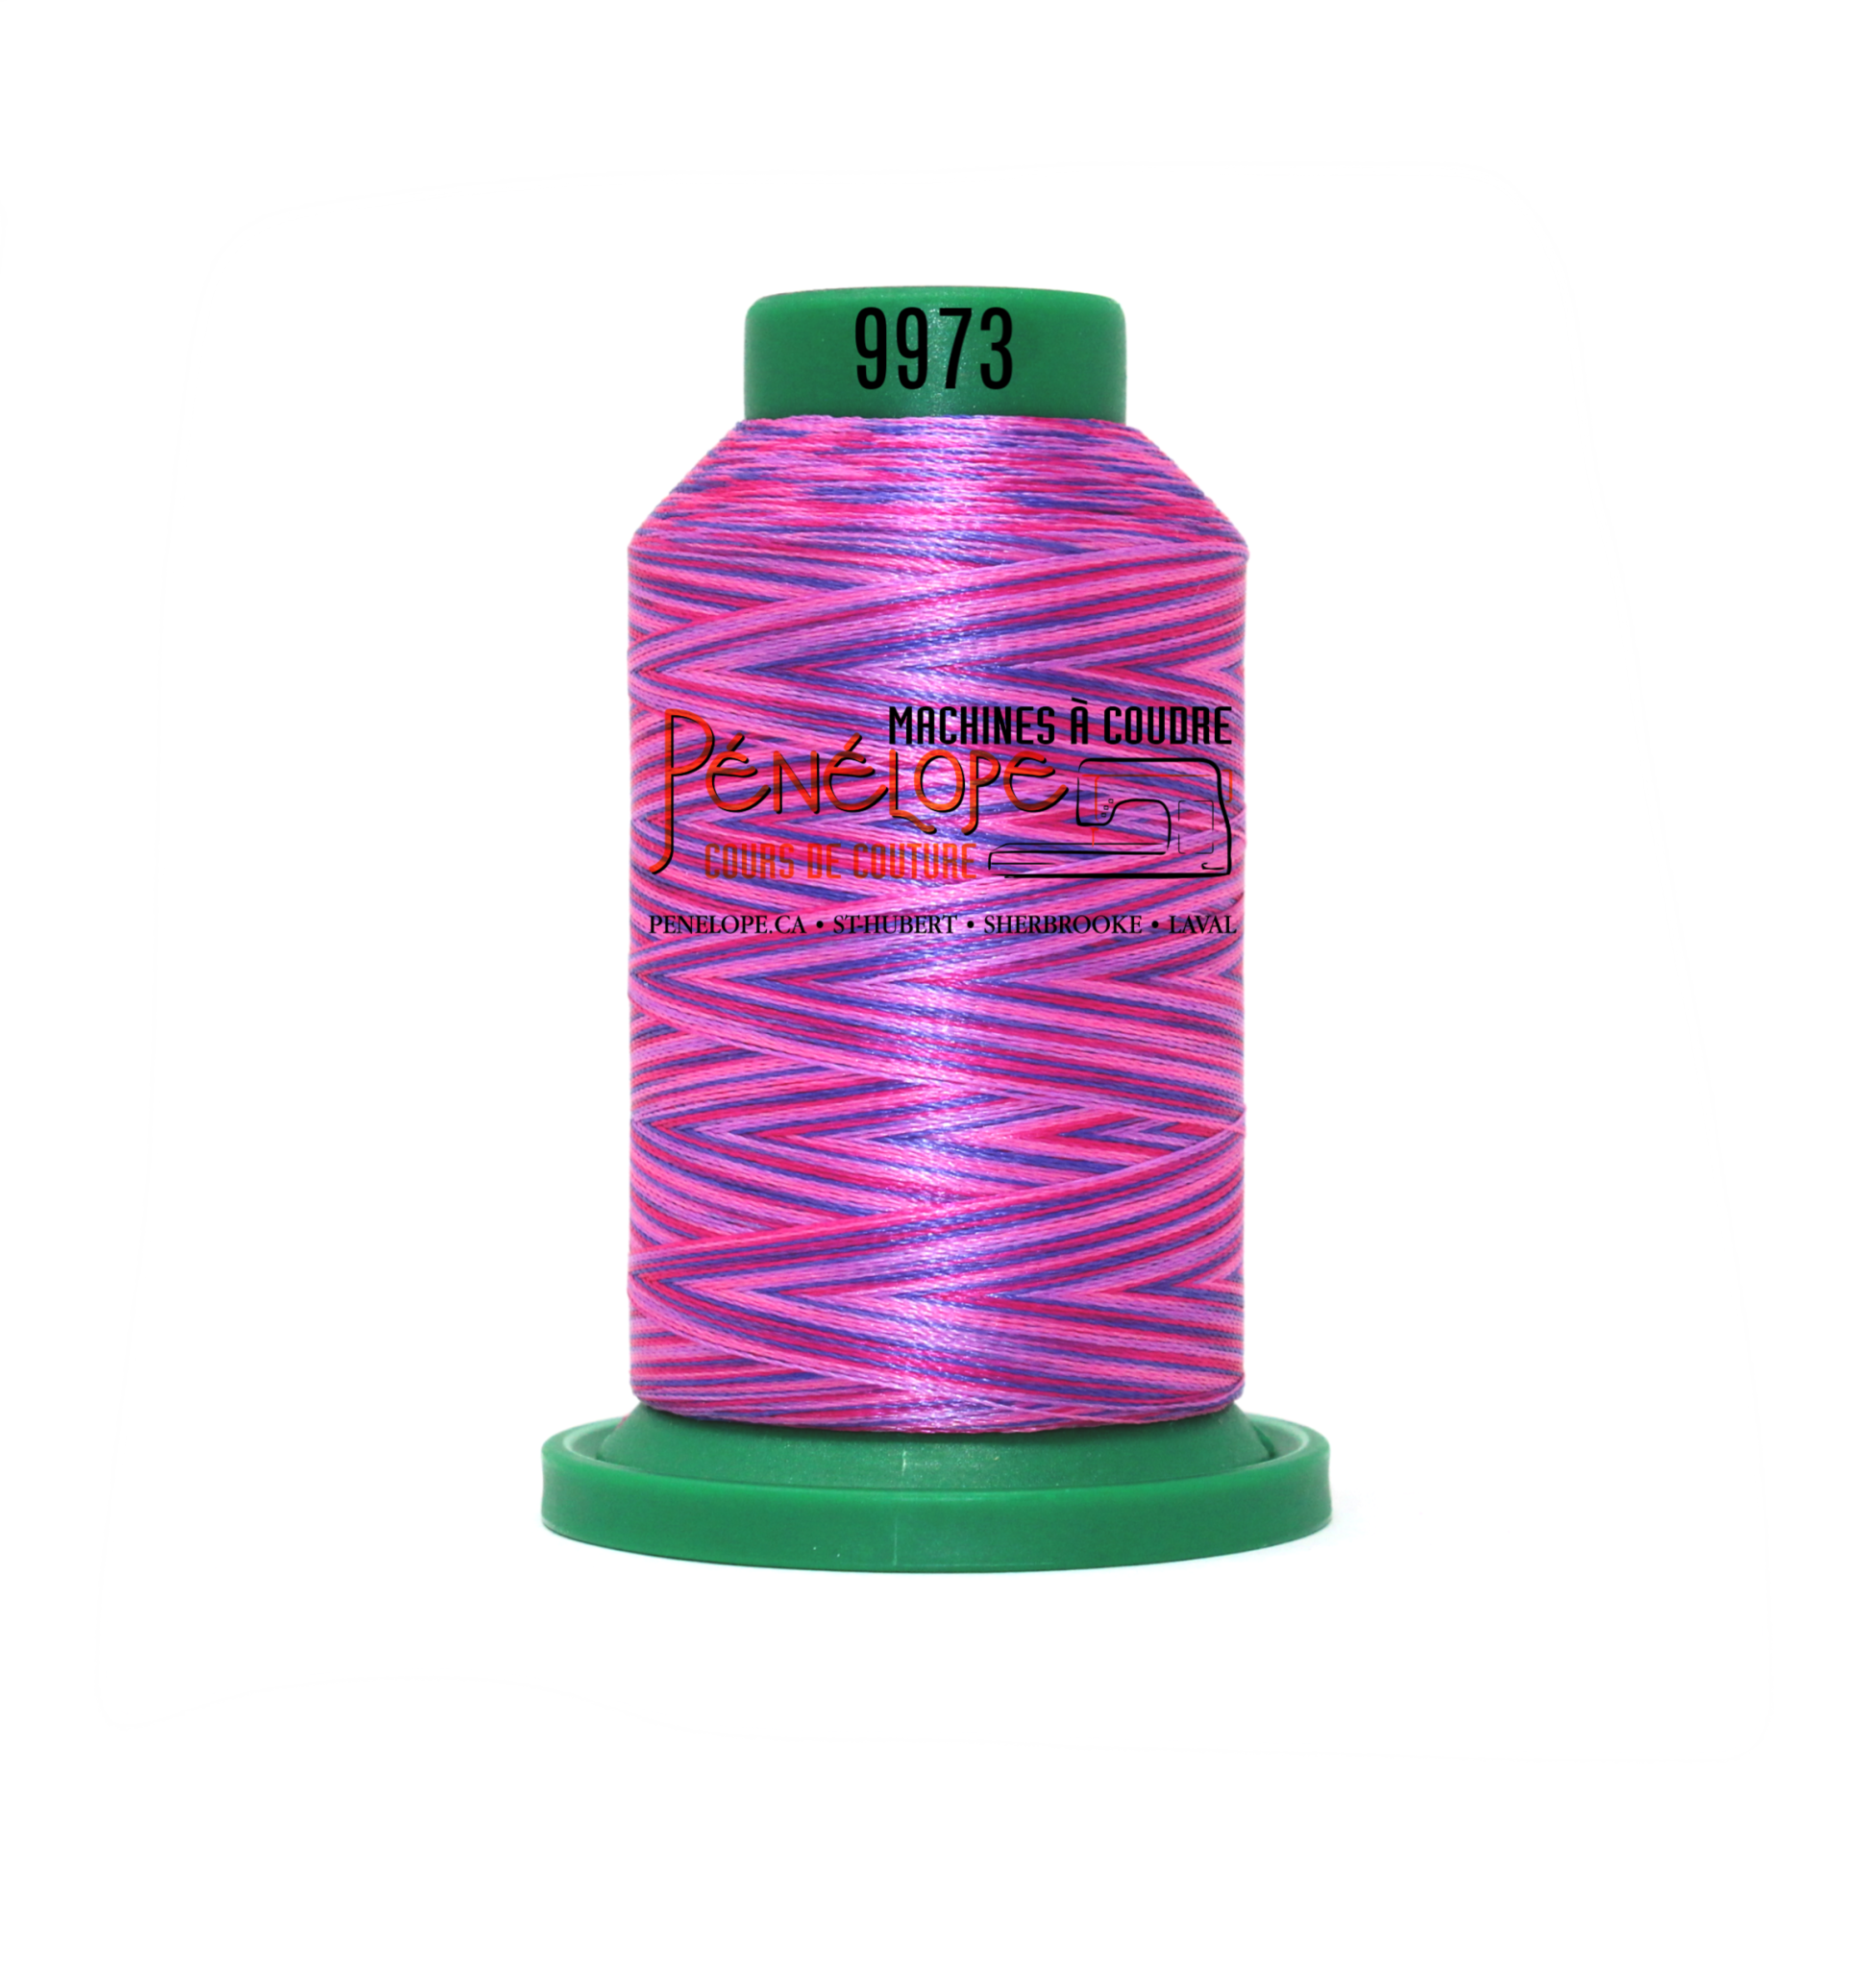 Isacord Isacord multicoloured sewing and embroidery thread 9973 1000m